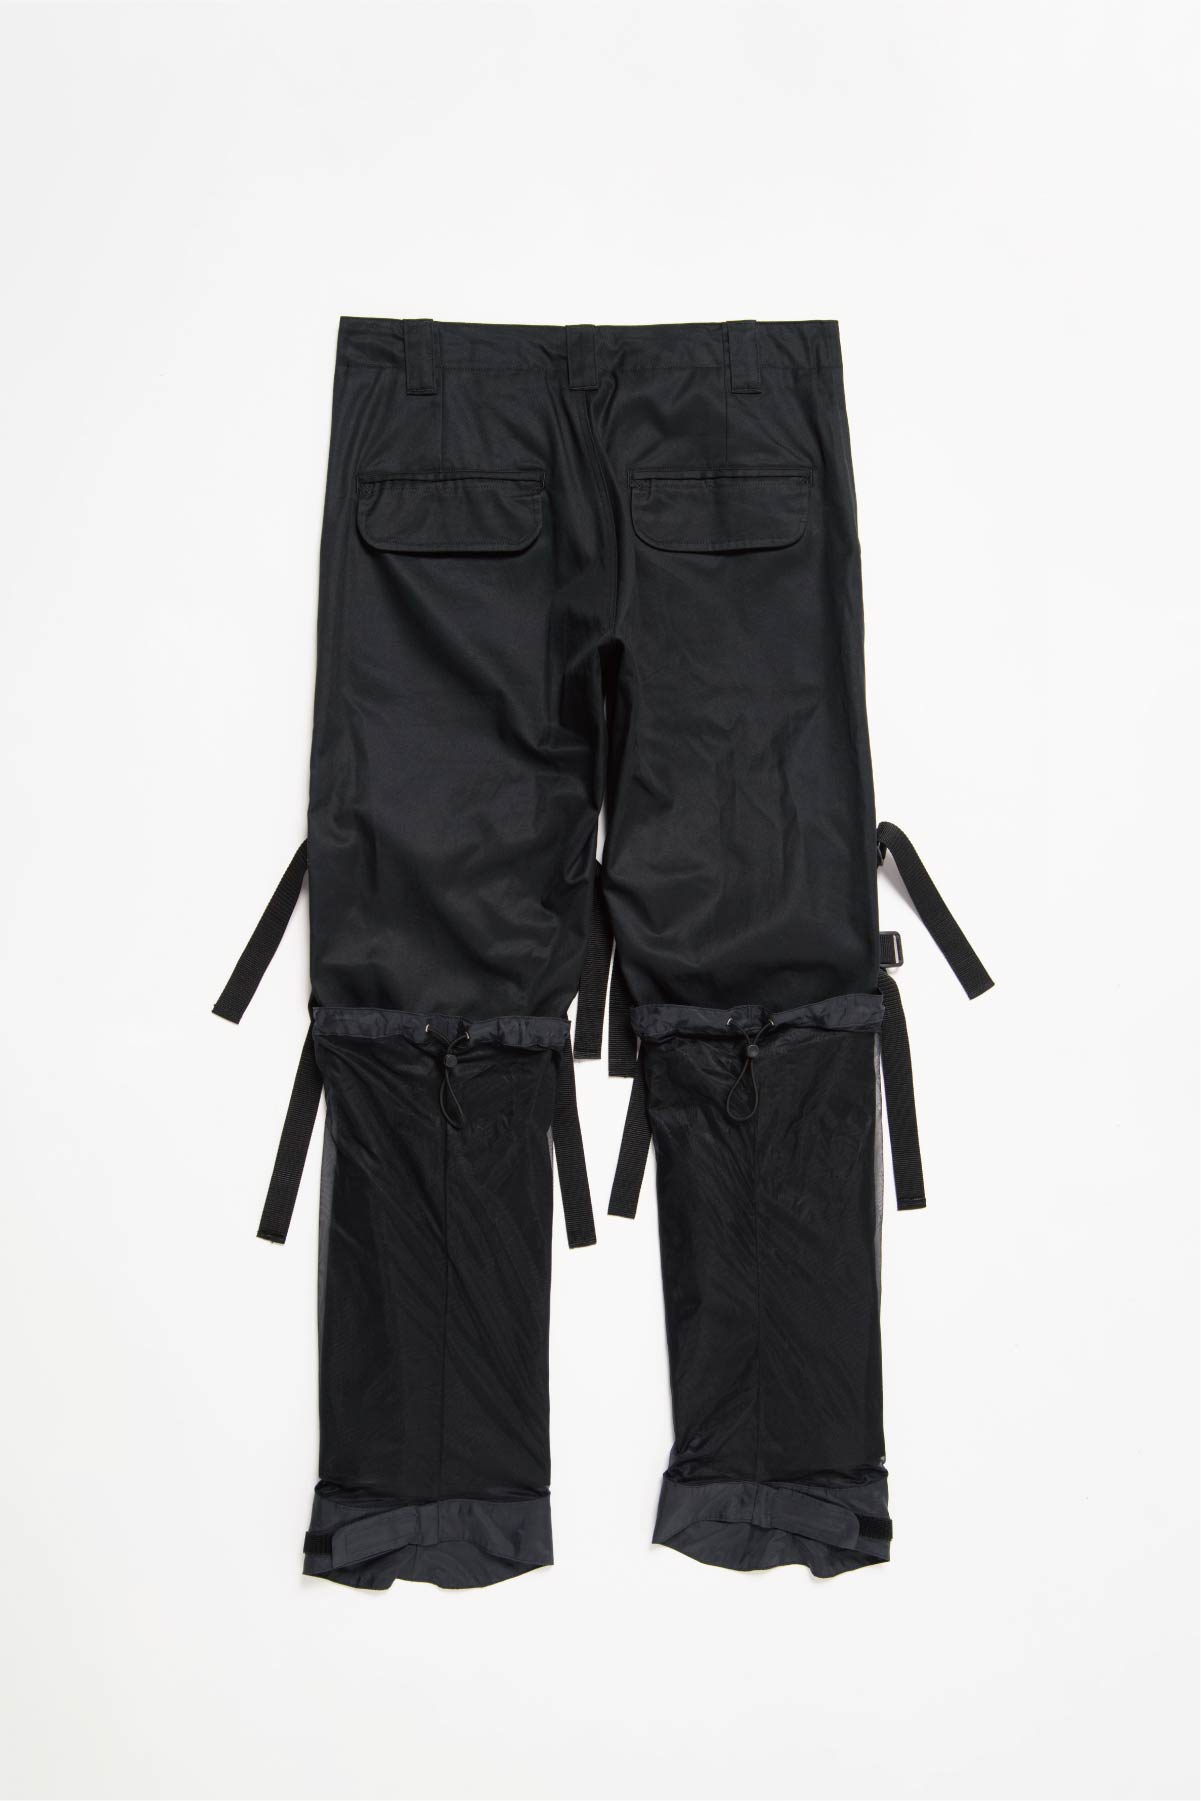 【Made to Order】　Cargo pants + Leg cover Set